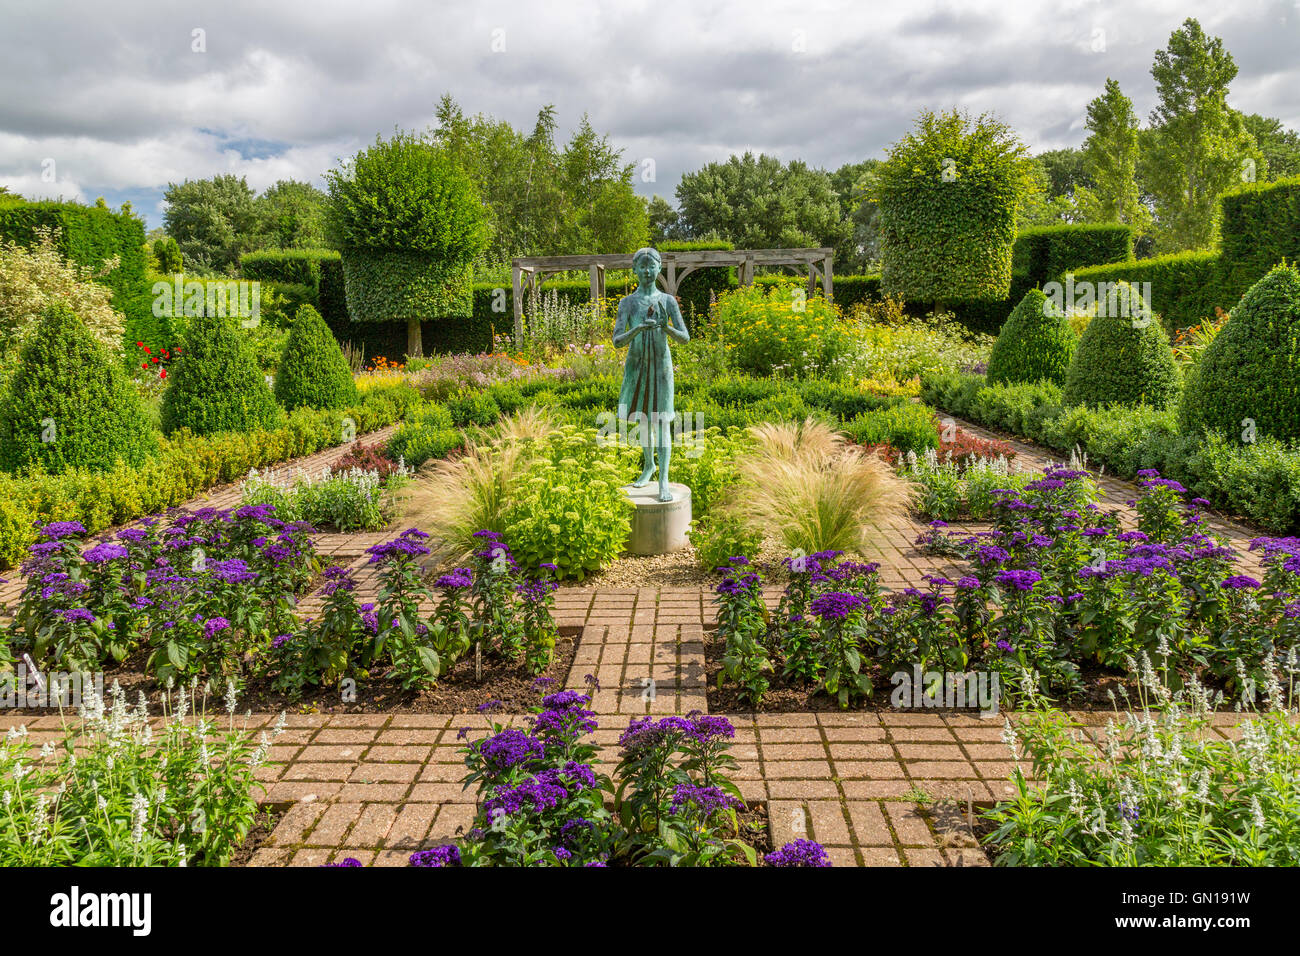 The Silent Space Garden at Waterperry containing Nathan David's sculpture 'Girl holding The Lamp of Wisdom', Oxfordshire, UK Stock Photo